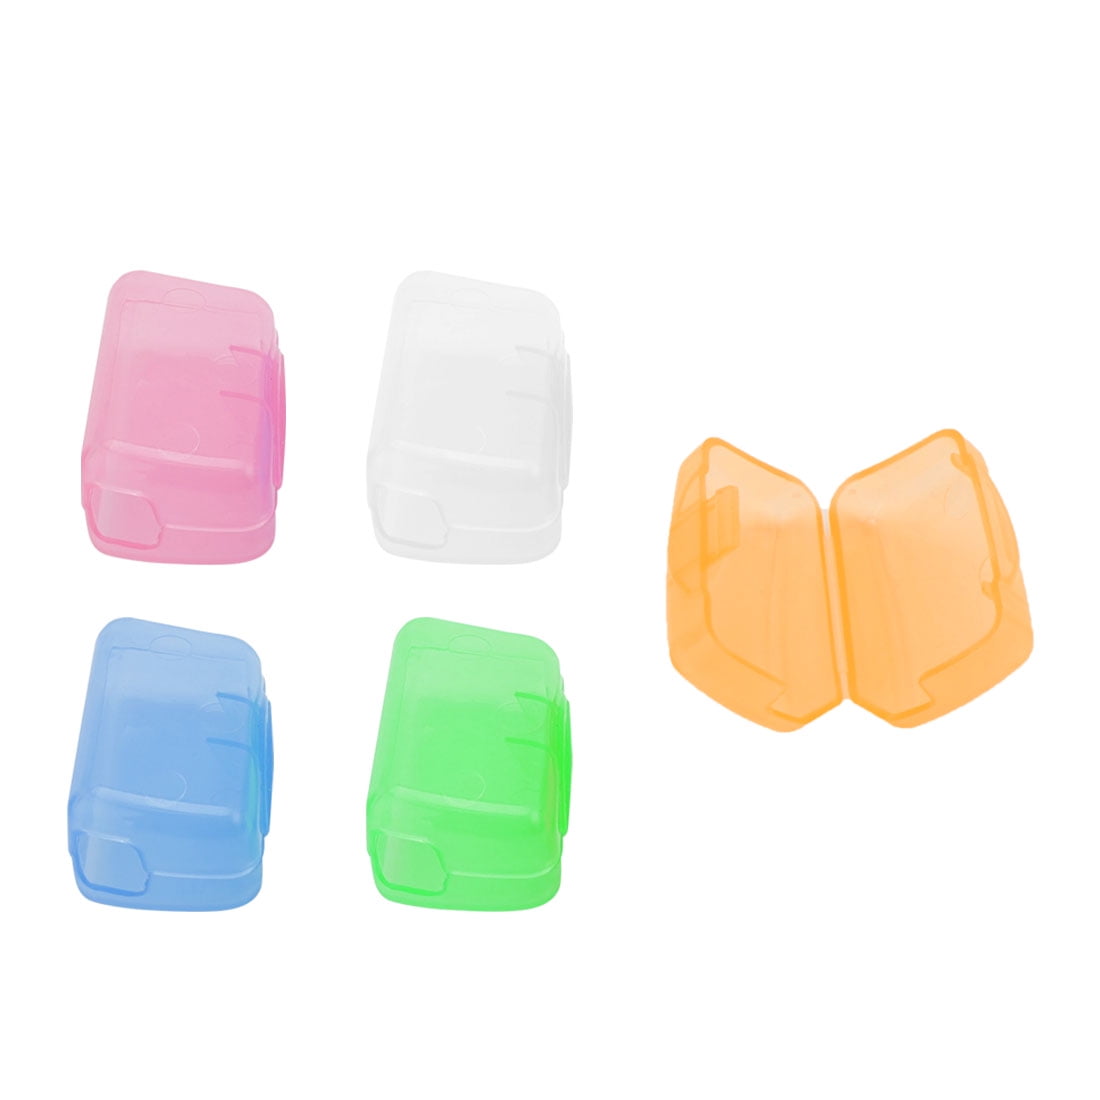 Silicone Portable Cartoon Toothbrush Head Cover Cap Case Travel Brush Protector 